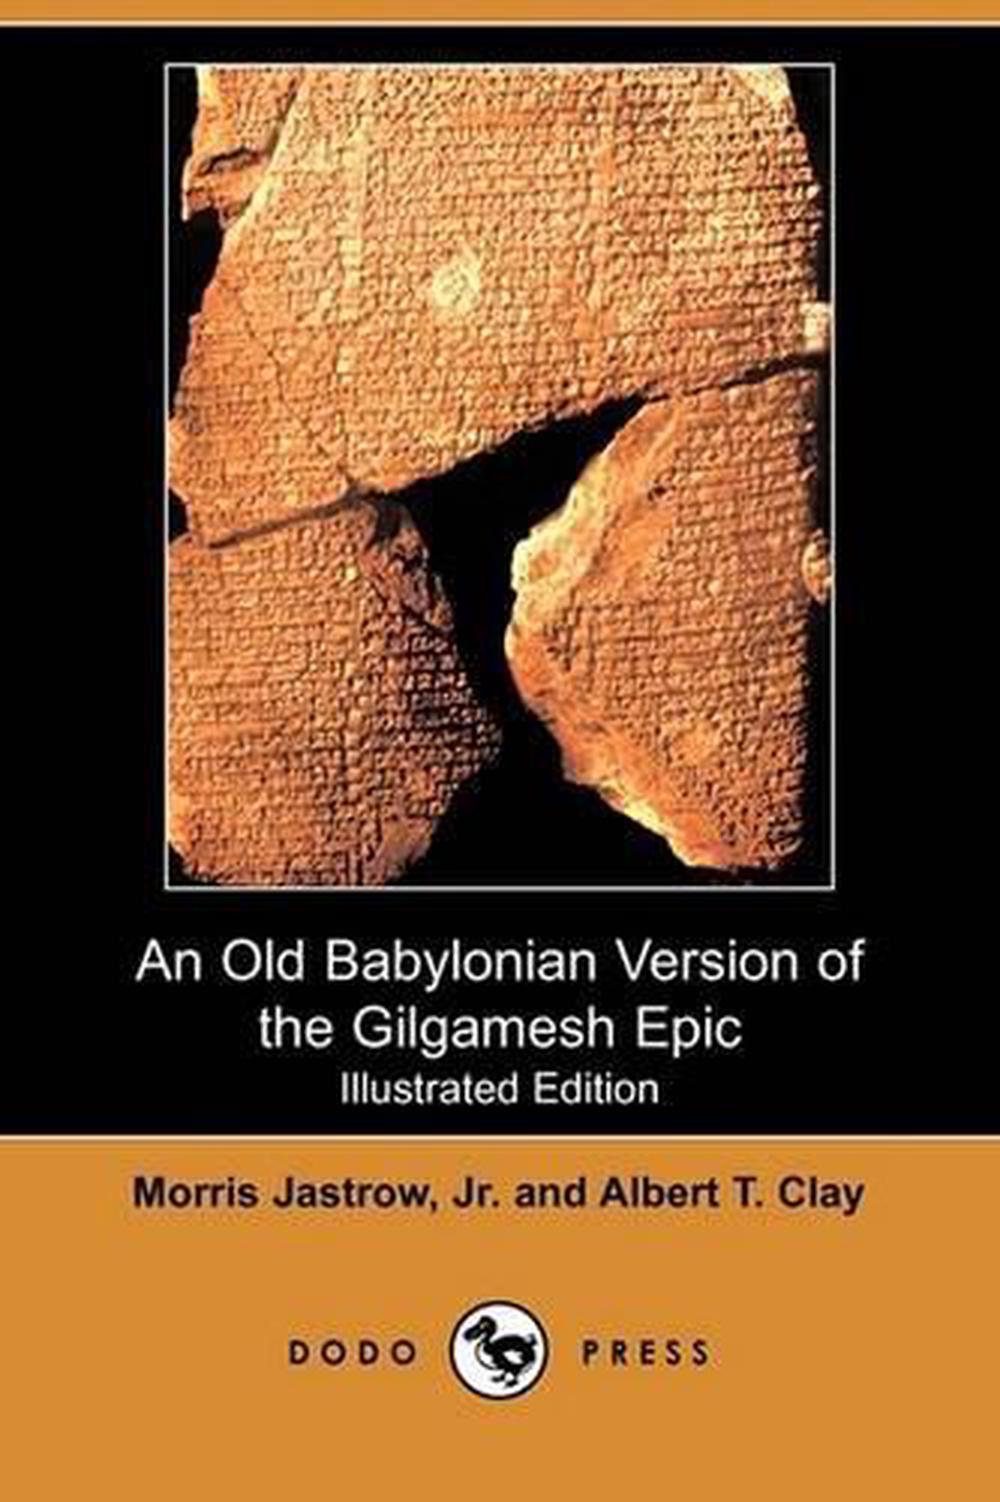 An Old Babylonian Version of the Gilgamesh Epic (Illustrated Edition